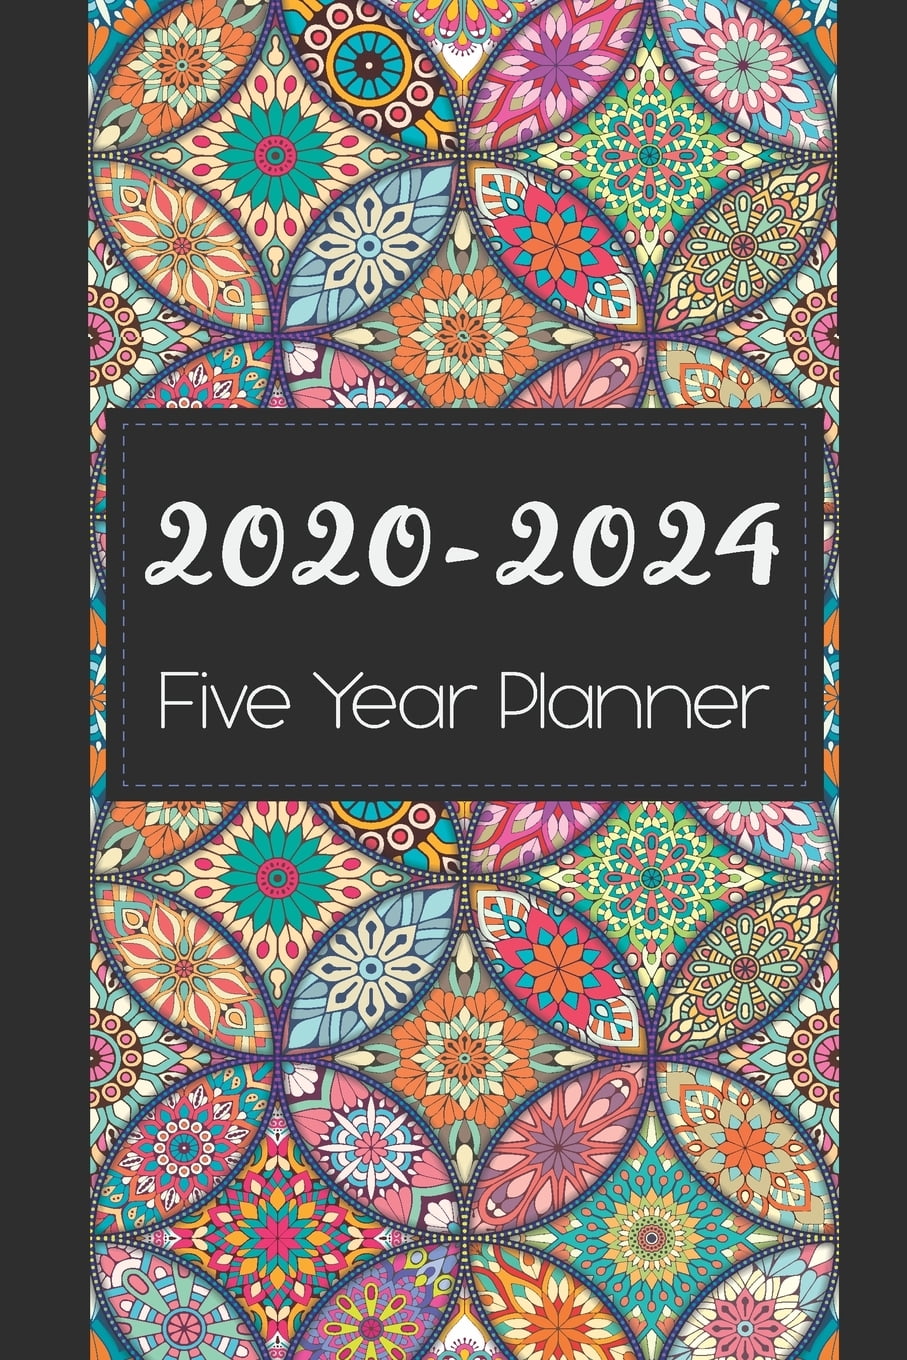 2020-2024 Five Year Planner: Colorful Mandala Cover, Monthly Schedule